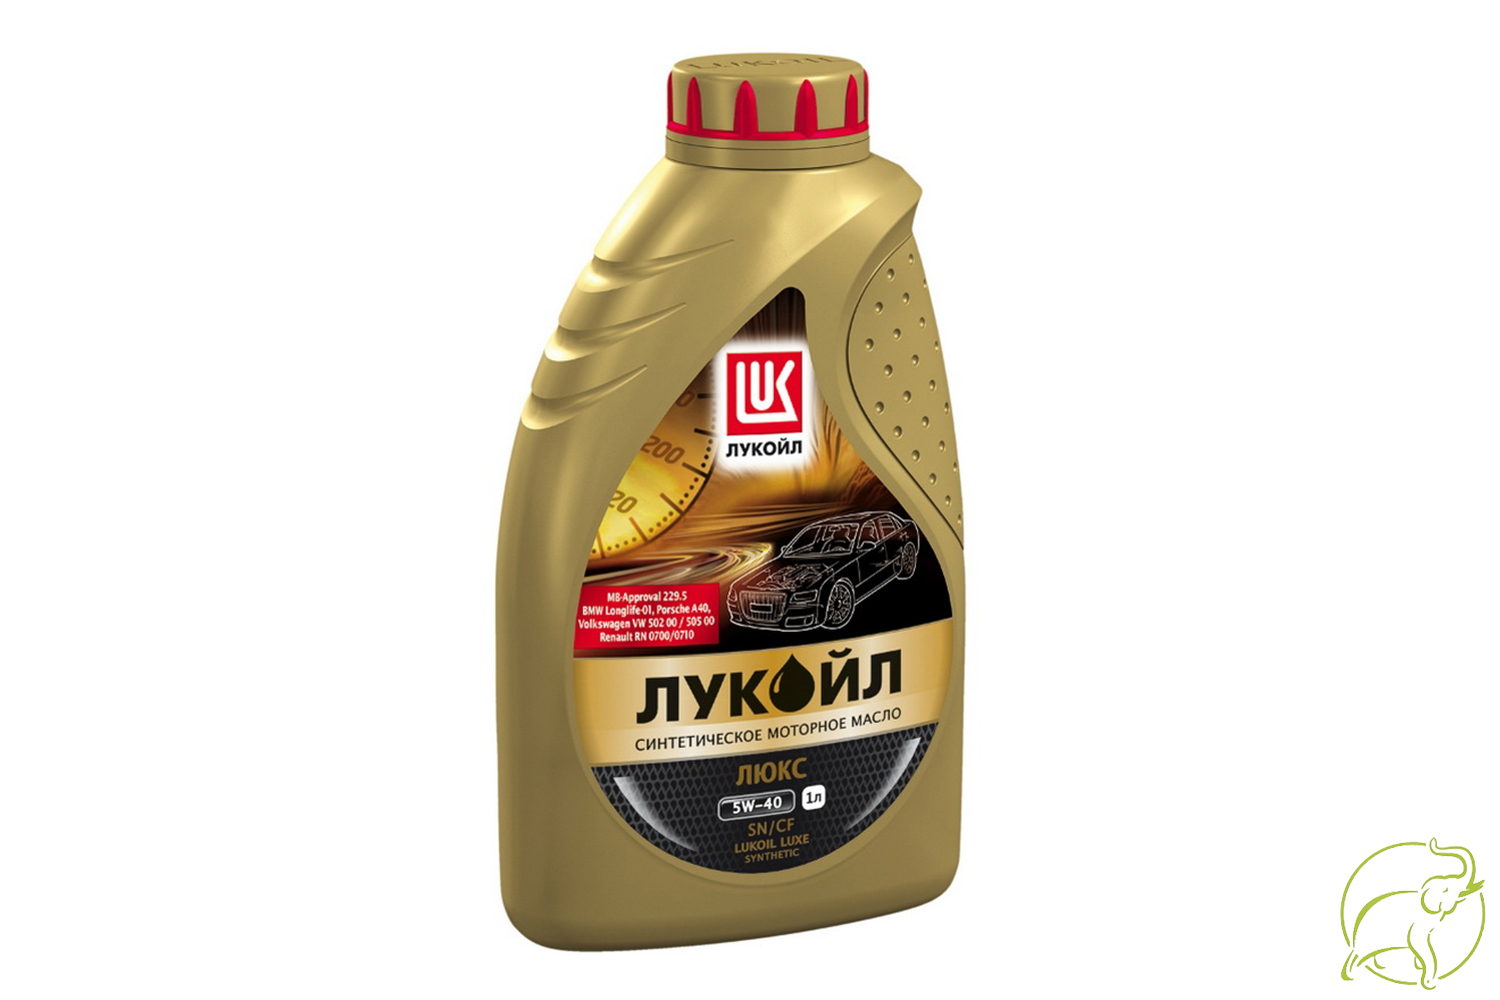 Масло лукойл для тойоты. Масло Лукойл Люкс 1л синт 5w40. Lukoil Luxe, Synthetic SAE 5w-40, API SN/CF. Масло моторное Лукойл Люкс синтетическое SAE 5w-40 API SN/CF. Масло Лукойл Люкс моторное синтетич.SAE 5w40 1л.